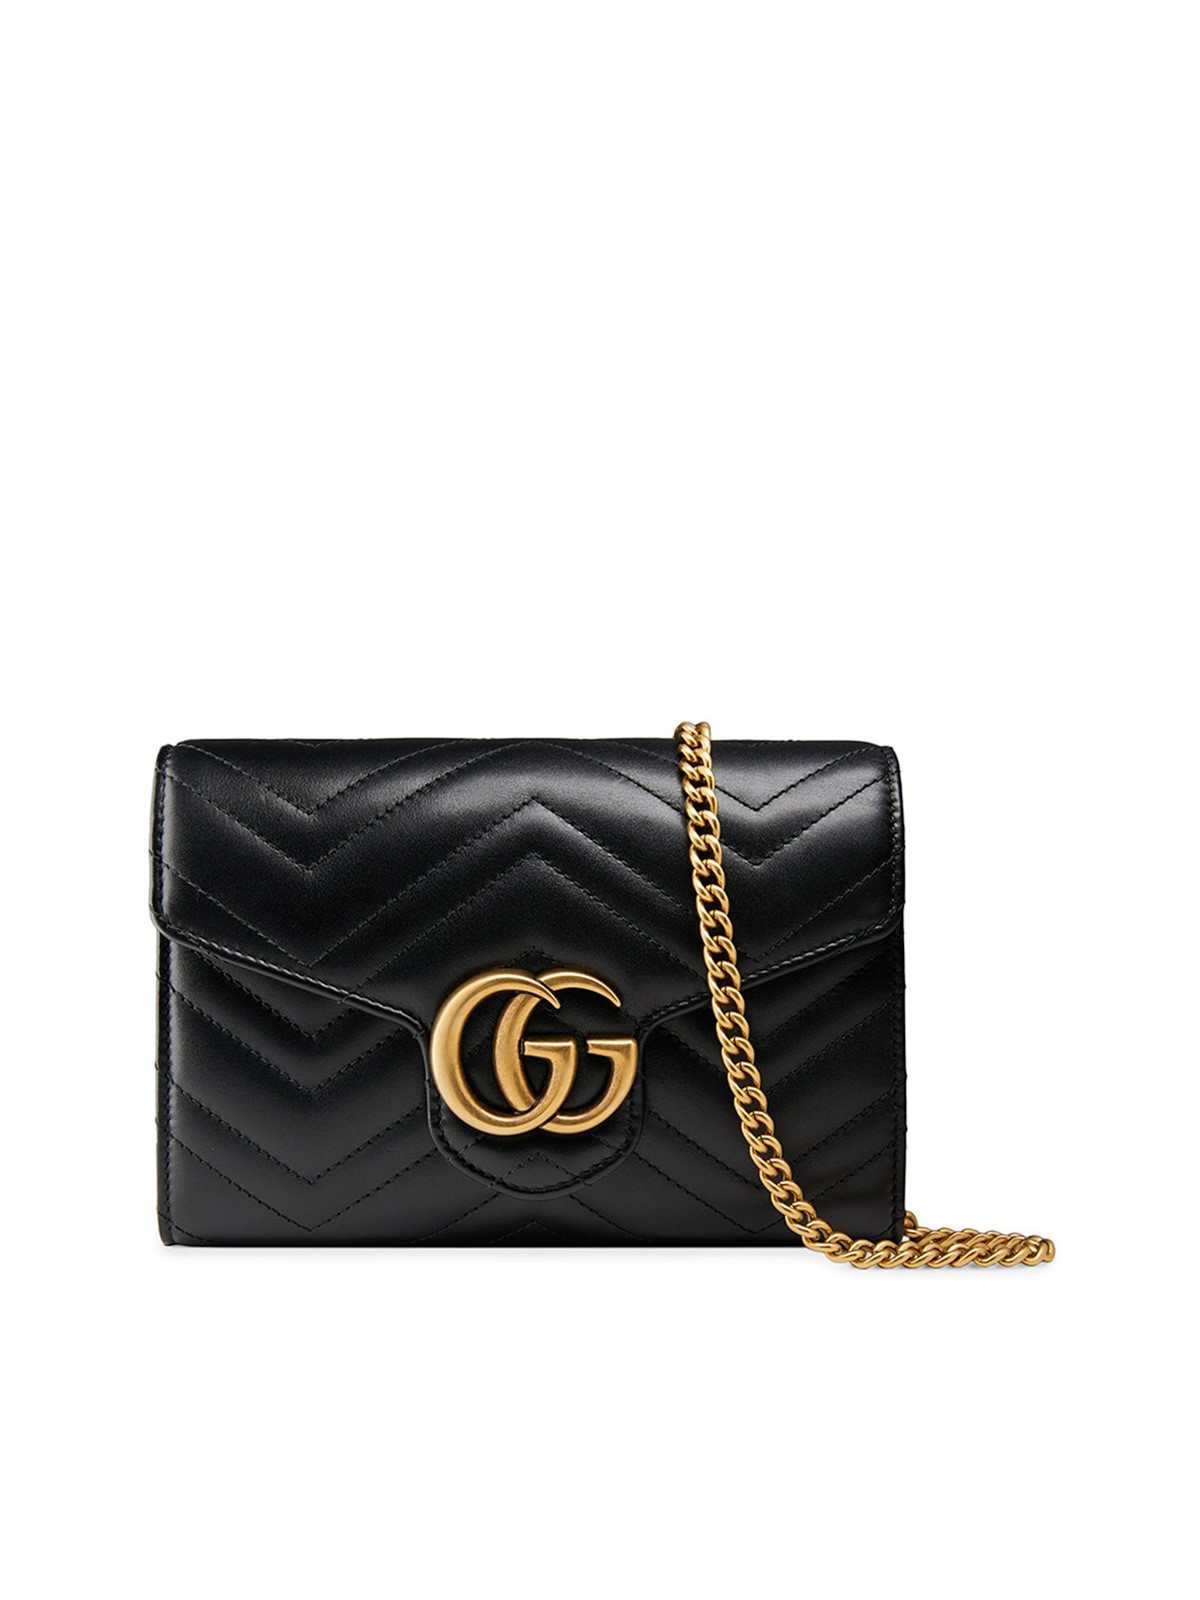 gucci MINI GG MARMONT SHOULDER BAG available on www.bagssaleusa.com - 22530